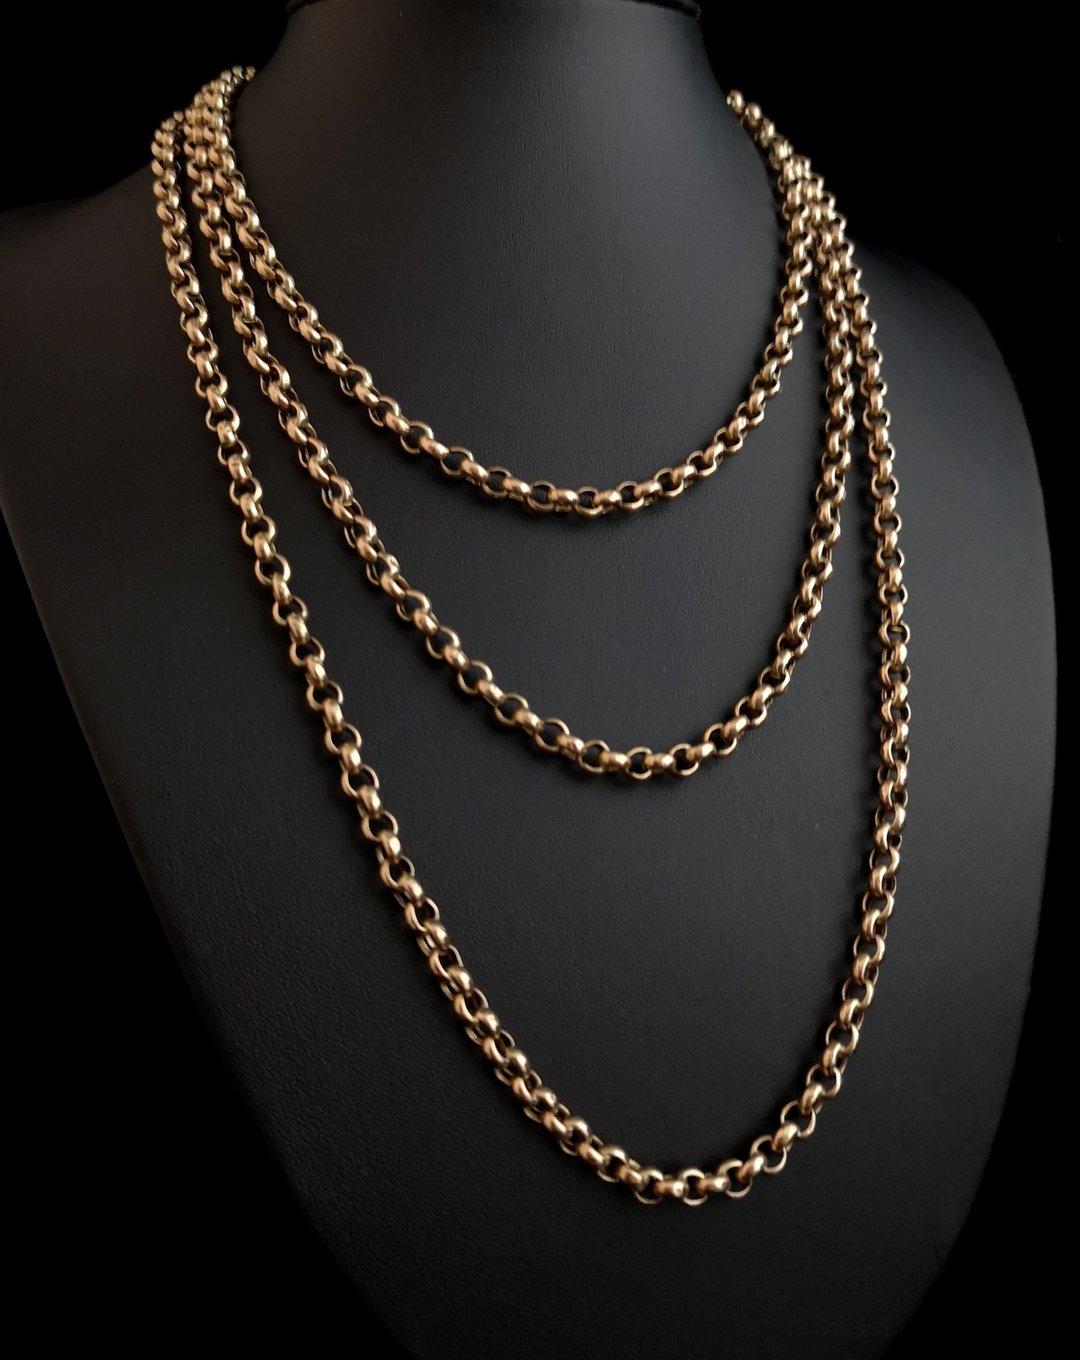 A beautiful antique, Victorian era, 9 karat gold longuard or muff chain.

Chunky 9 karat gold round rolo / belcher type links with a rich aged patina that you can only see in antique gold.

It is a long length chain, easily wrapping around three